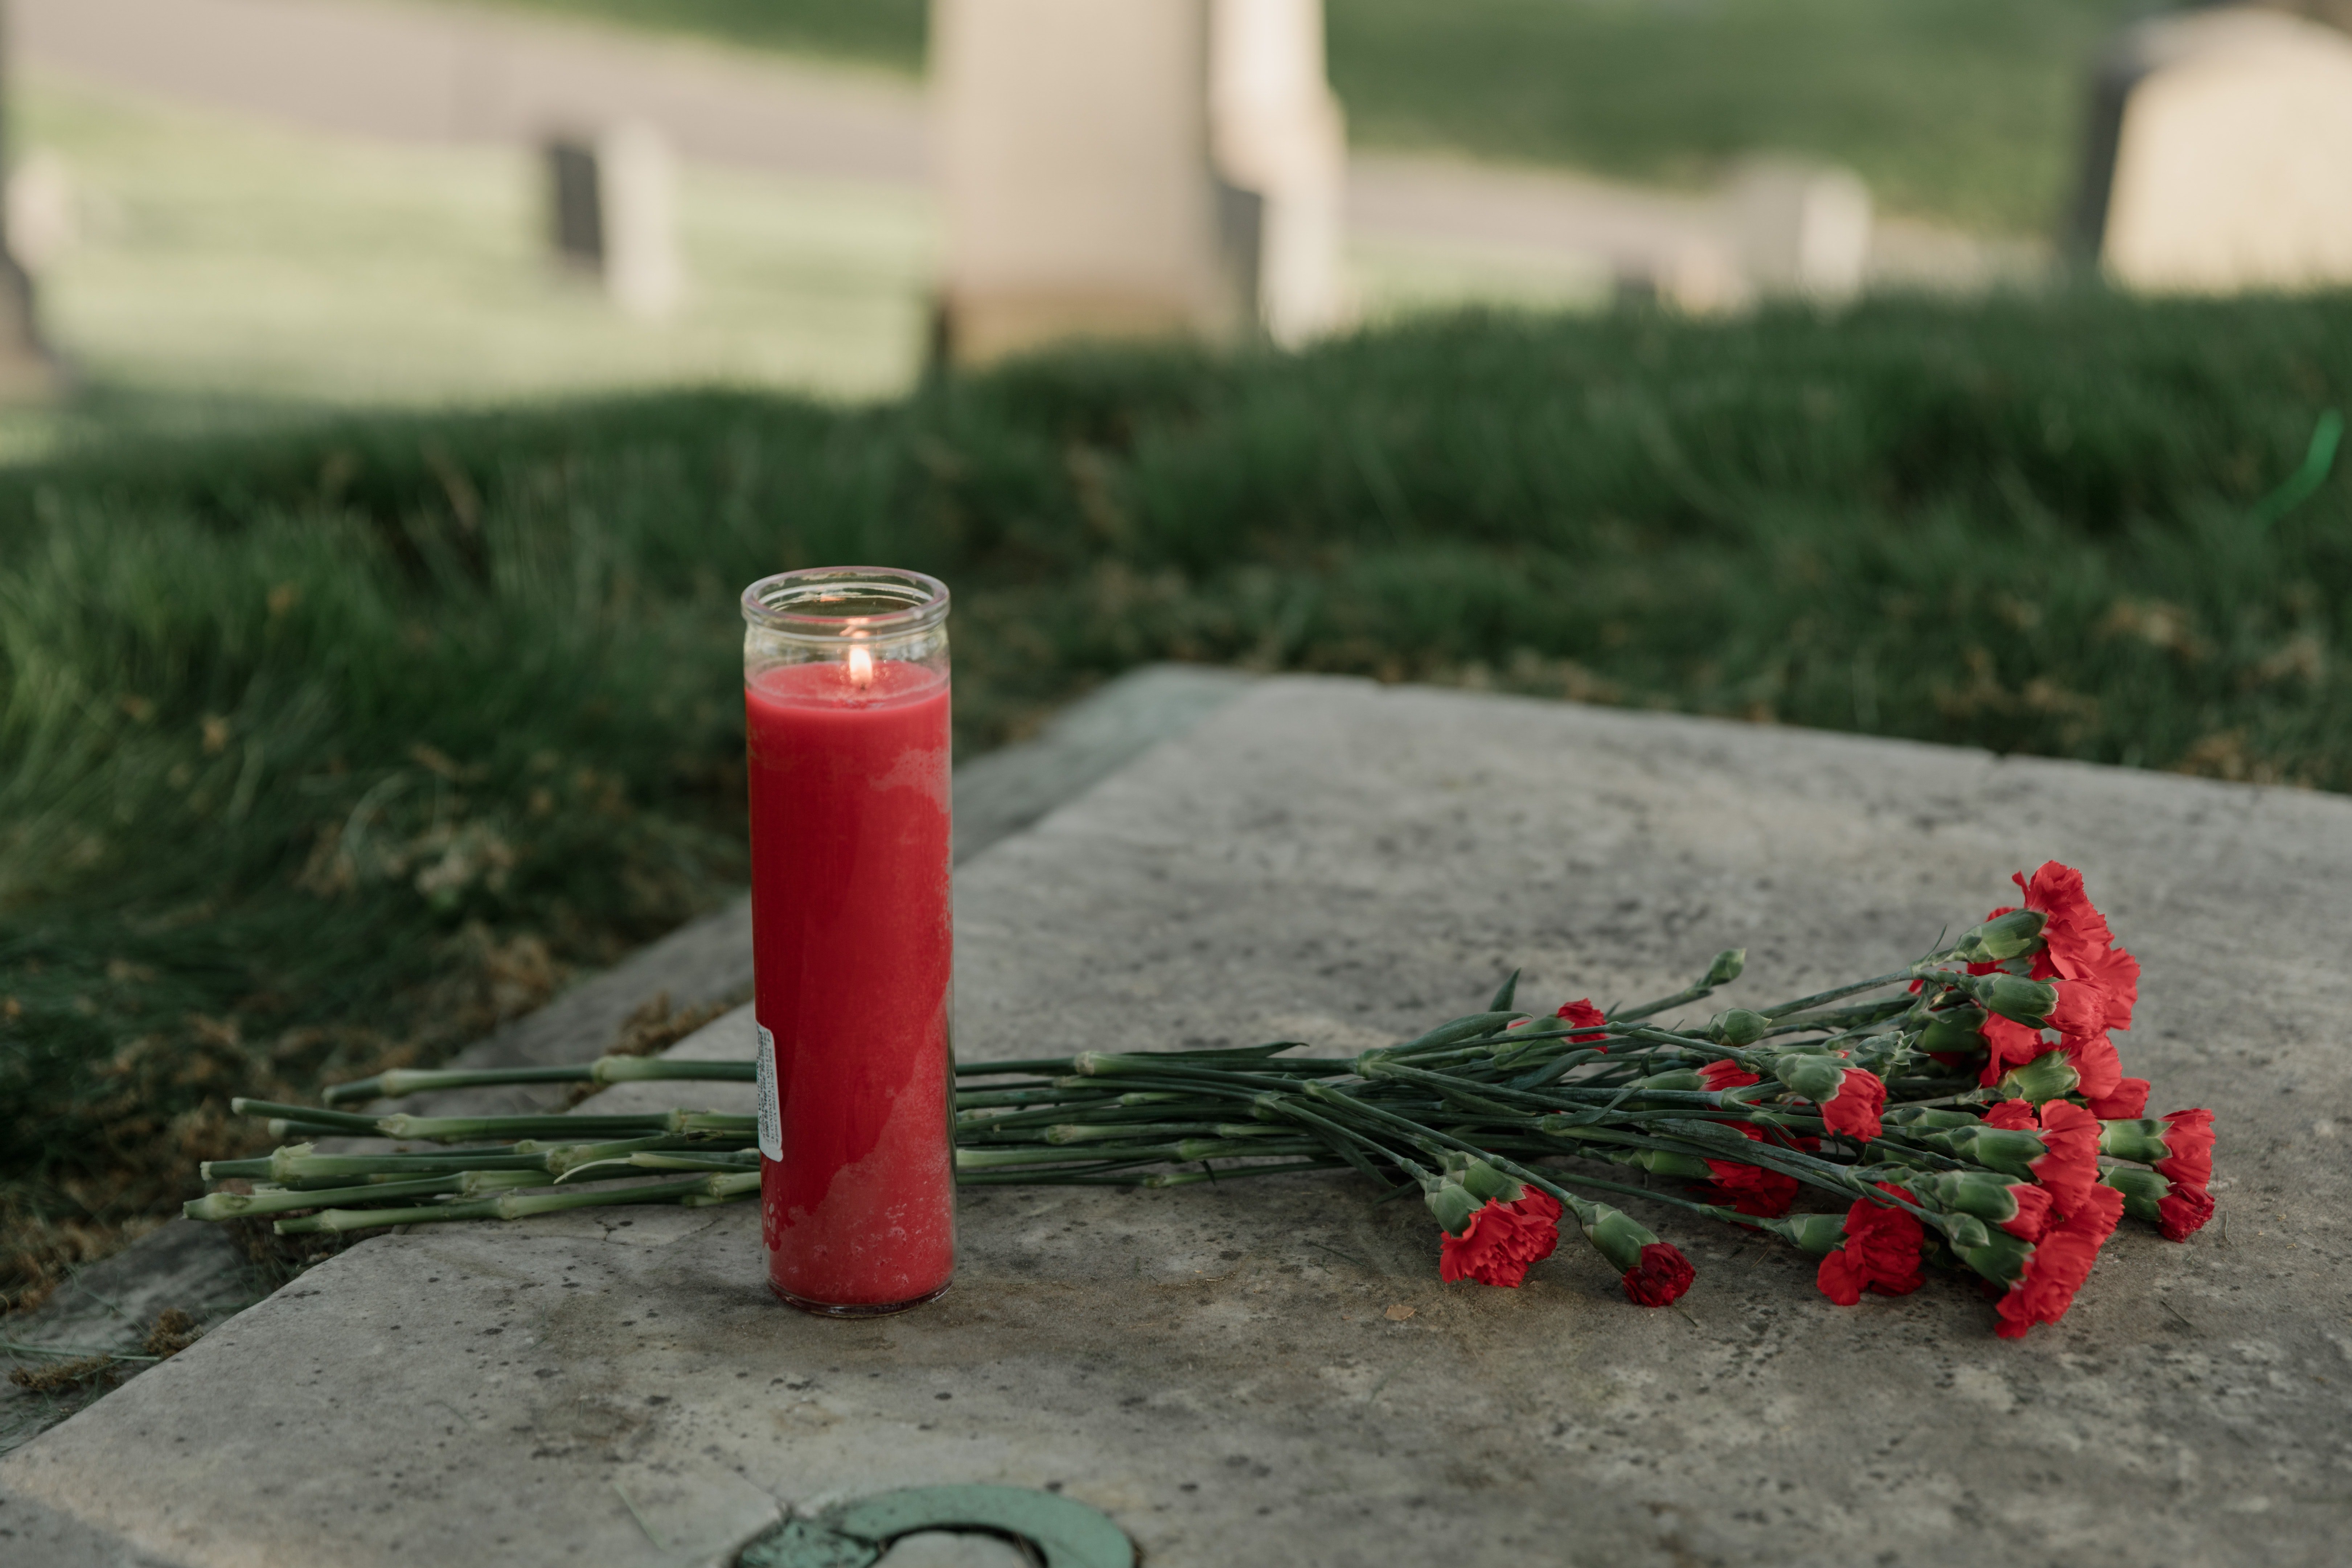 Emily visited her son's grave everyday | Photo: Pexels